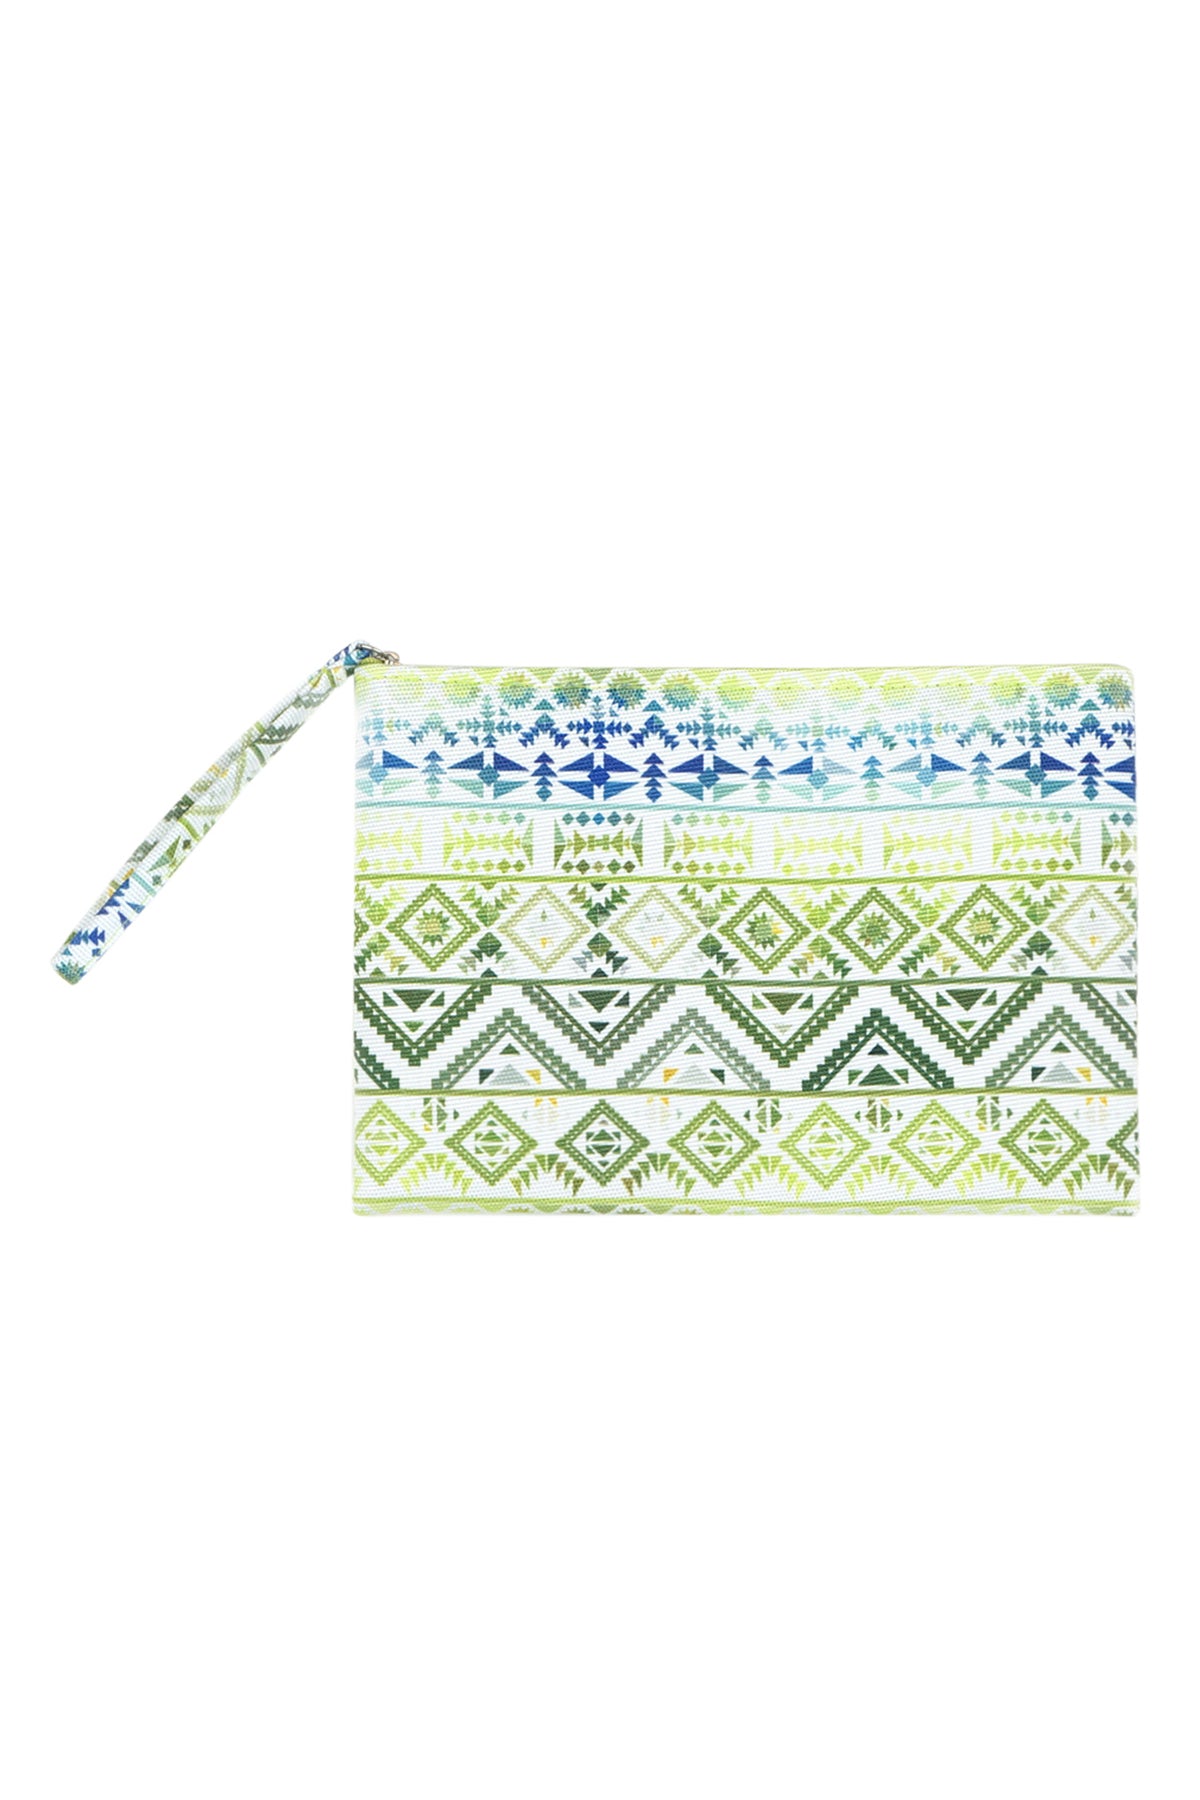 COLORFUL TRIBAL POUCH (NOW $1.75 ONLY!)